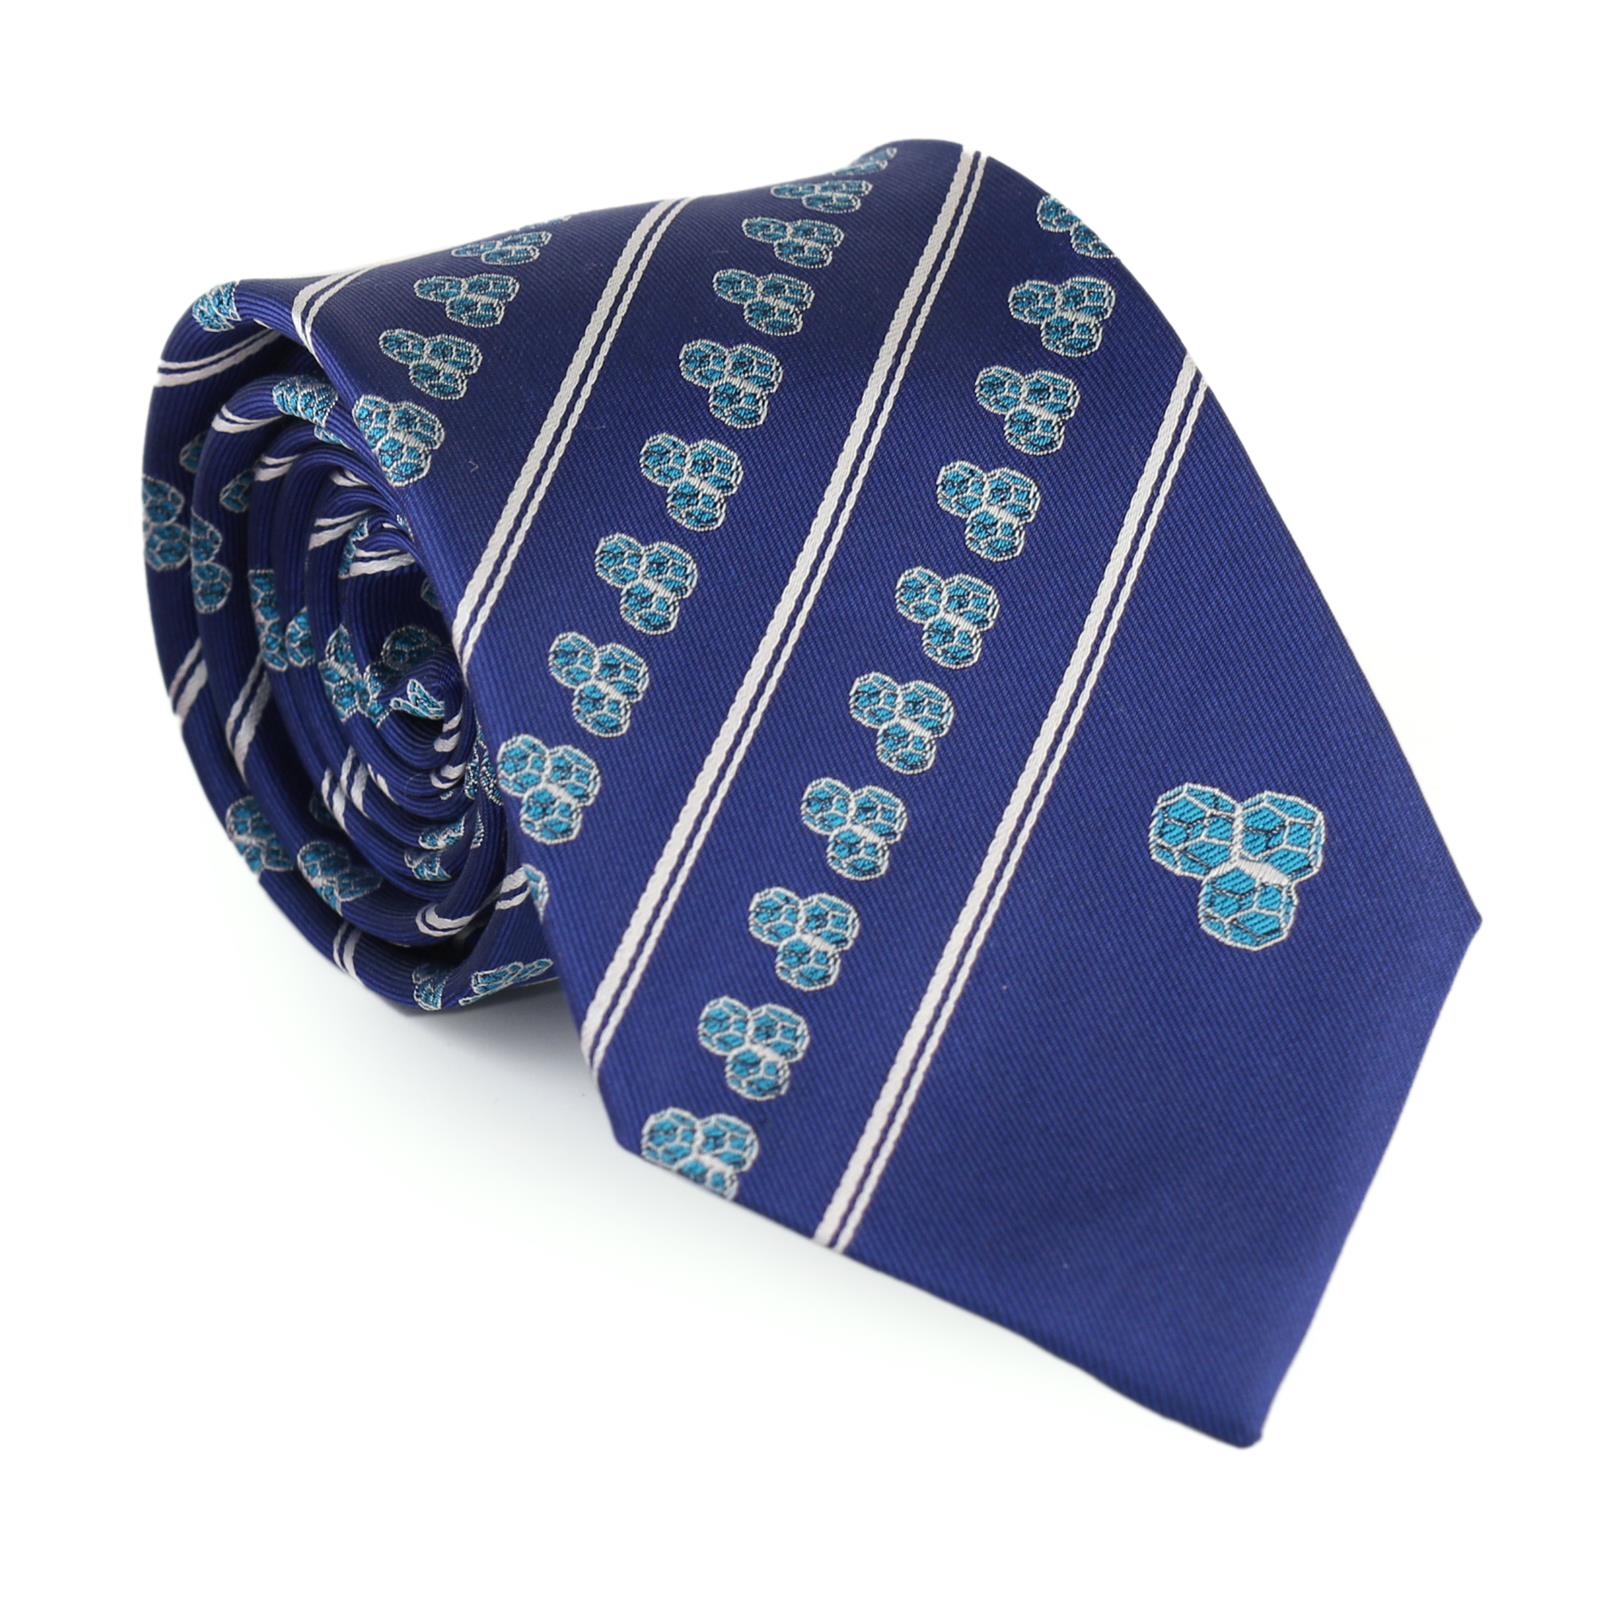 Promotional Micro Woven Polyester Ties